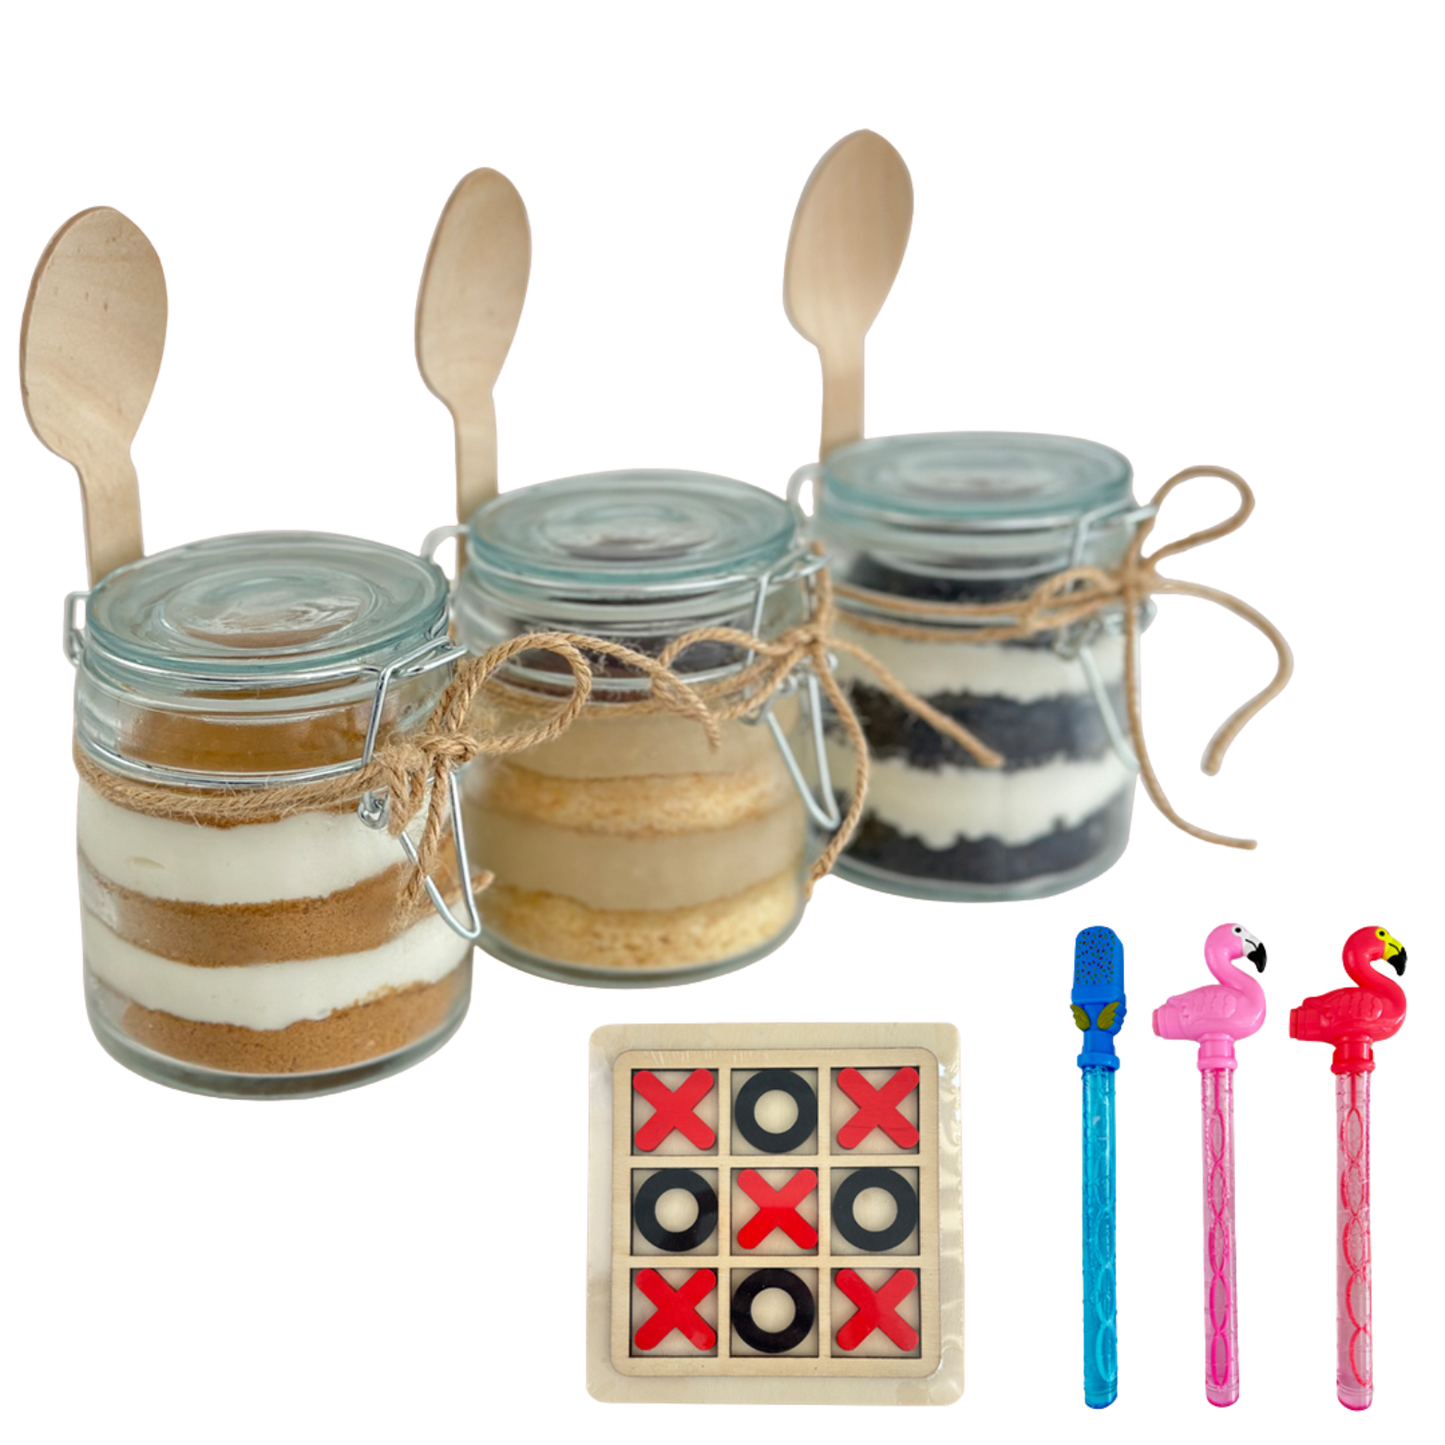 Assorted mini puddings in Jars (3pcs) & comes with 1 free toy